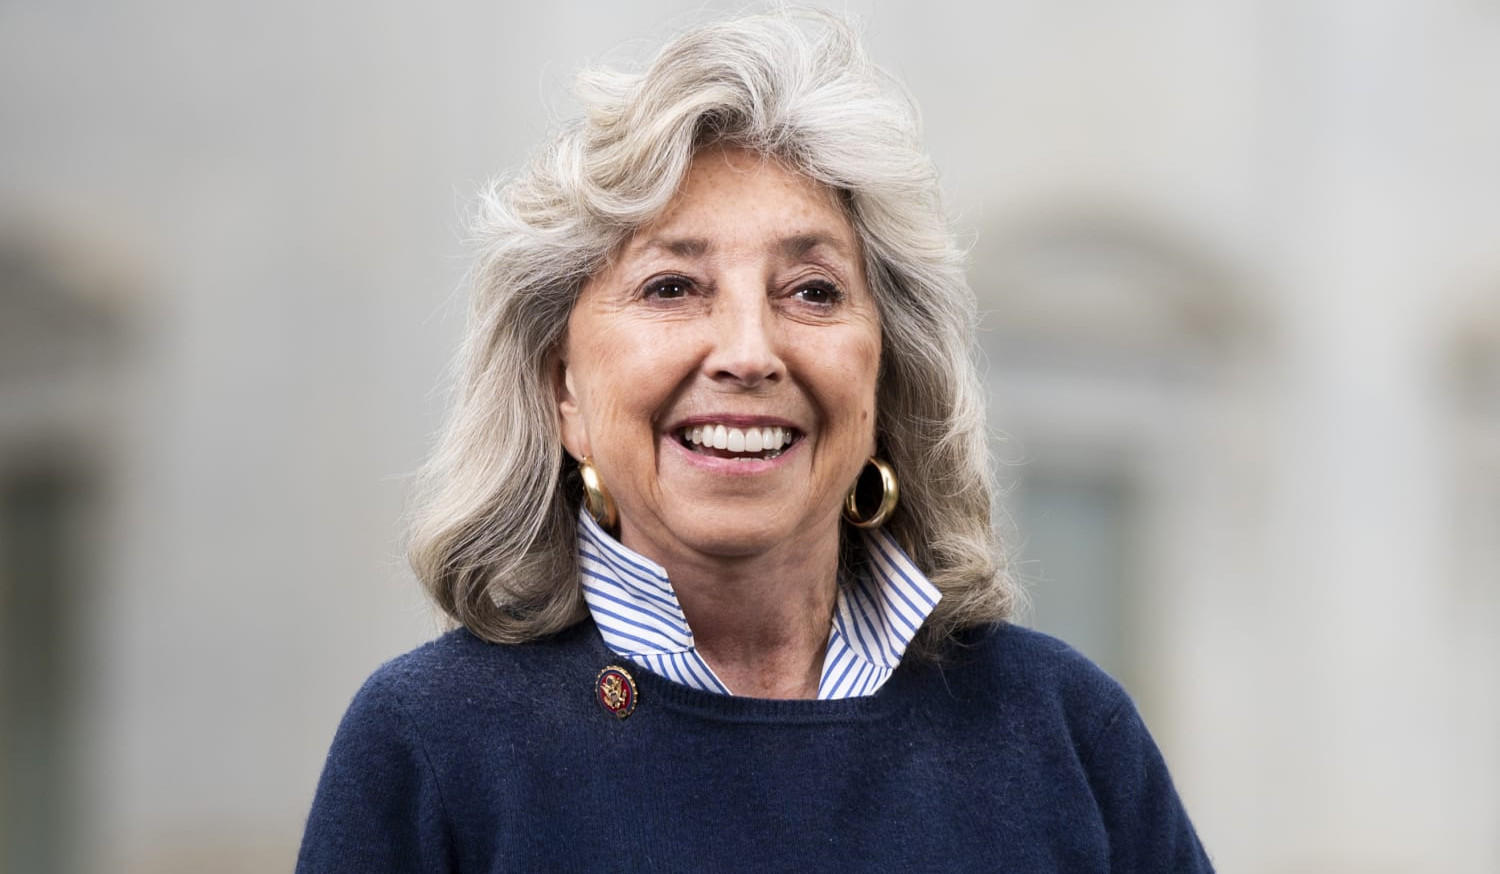 Dina Titus submitted bill on sanctions against Azerbaijan to US Congress